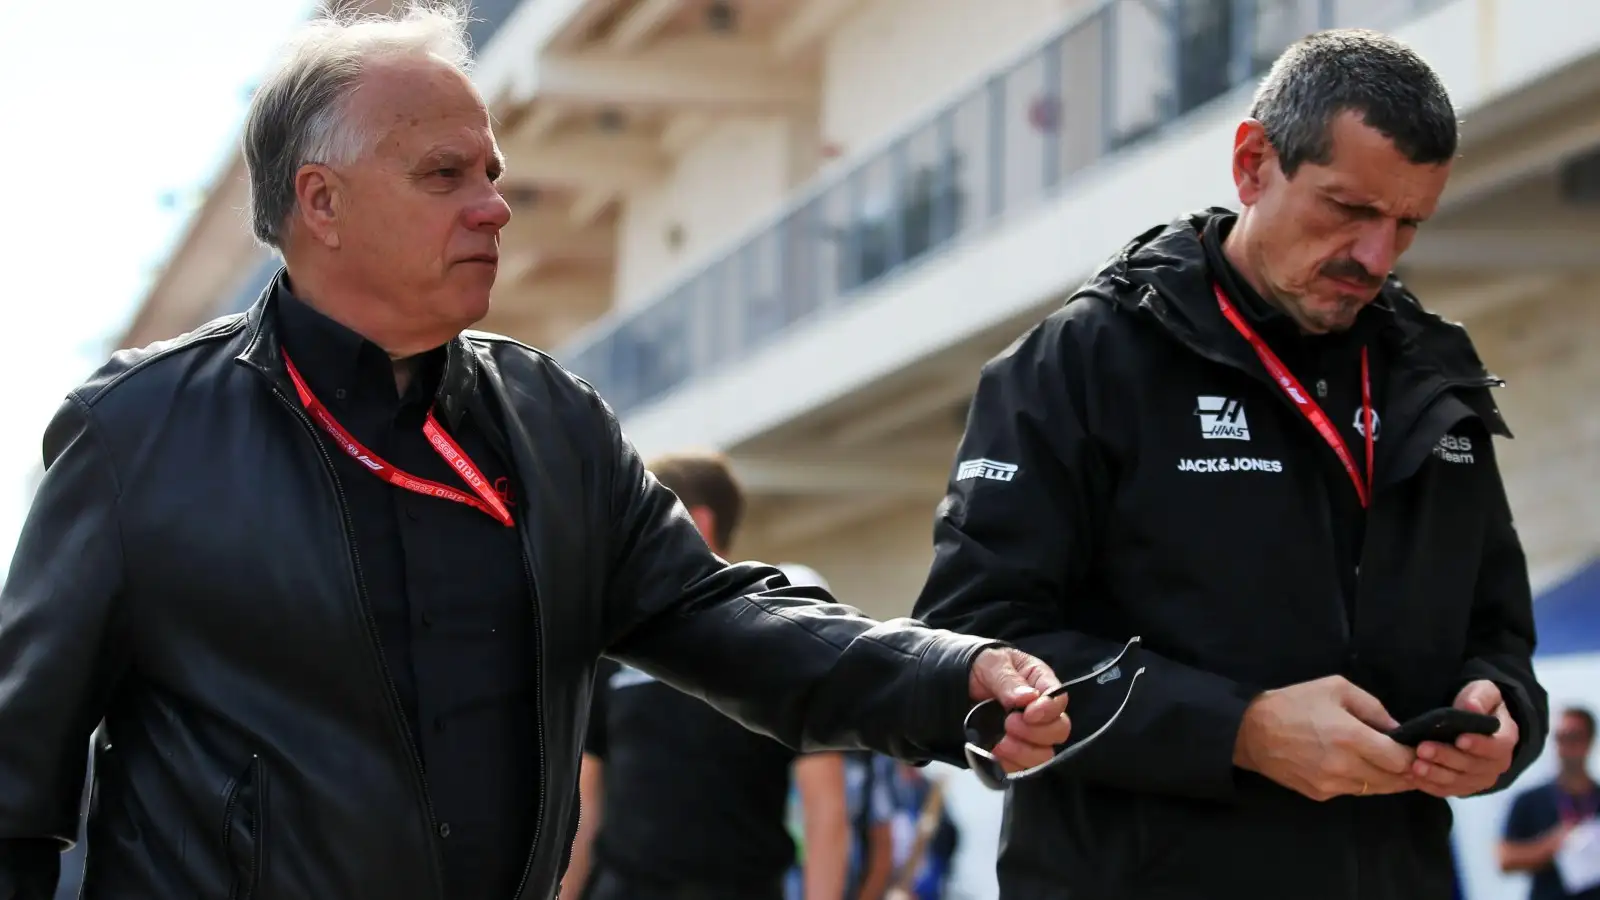 Gene Haas and Guenther Steiner walk together in the Formula 1 paddock.